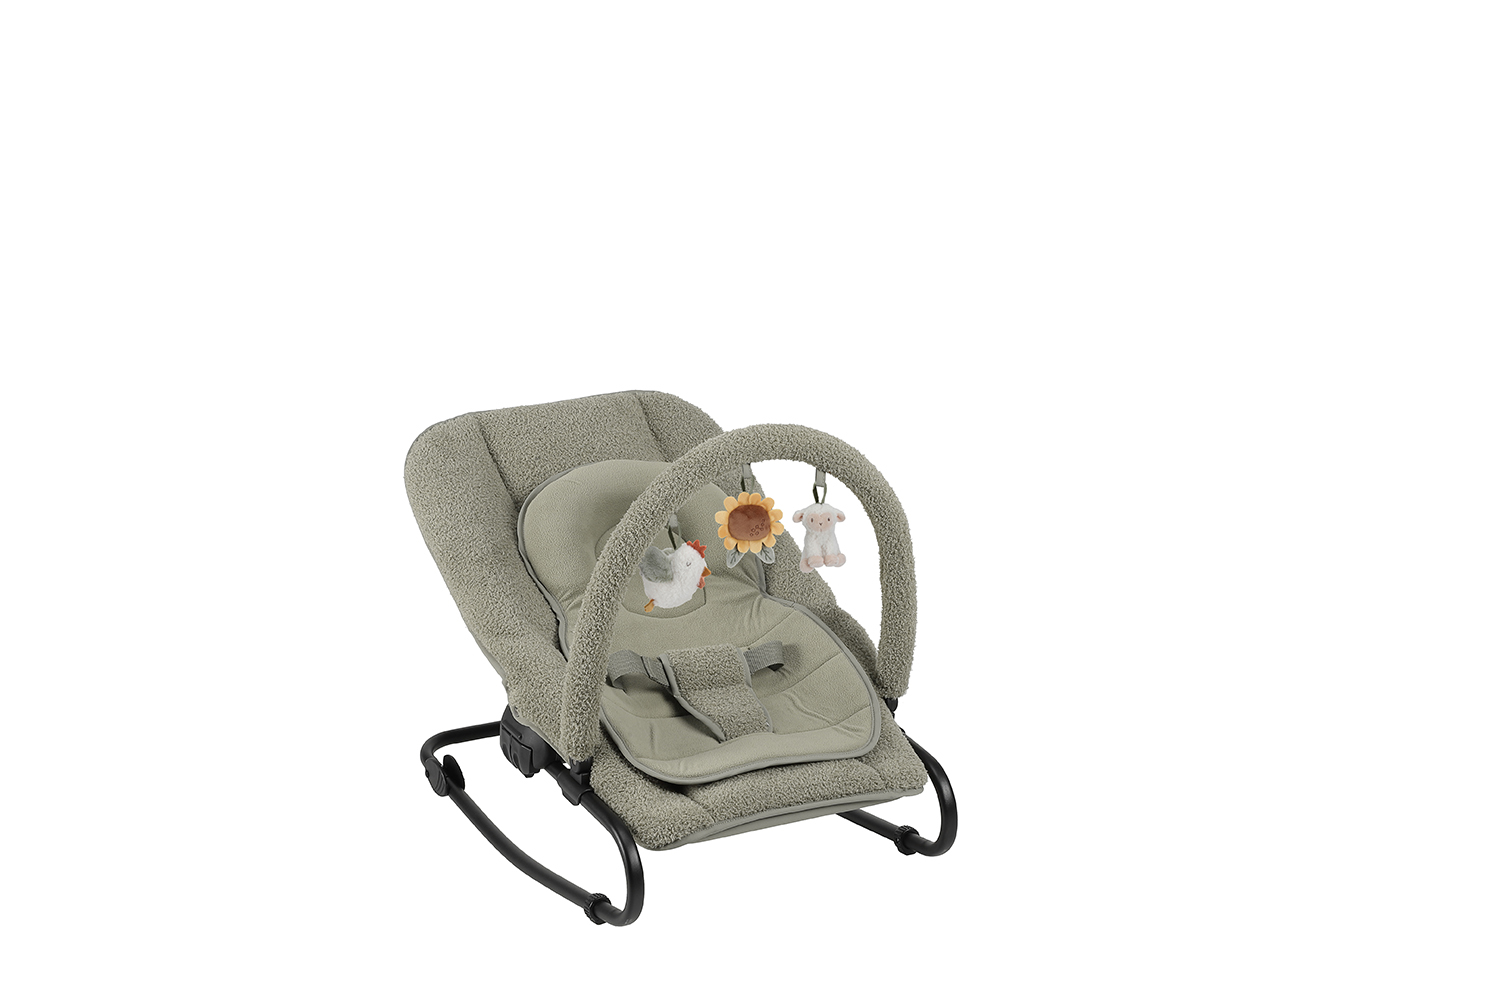 Kinderwippe Babywippe Little Farm olive